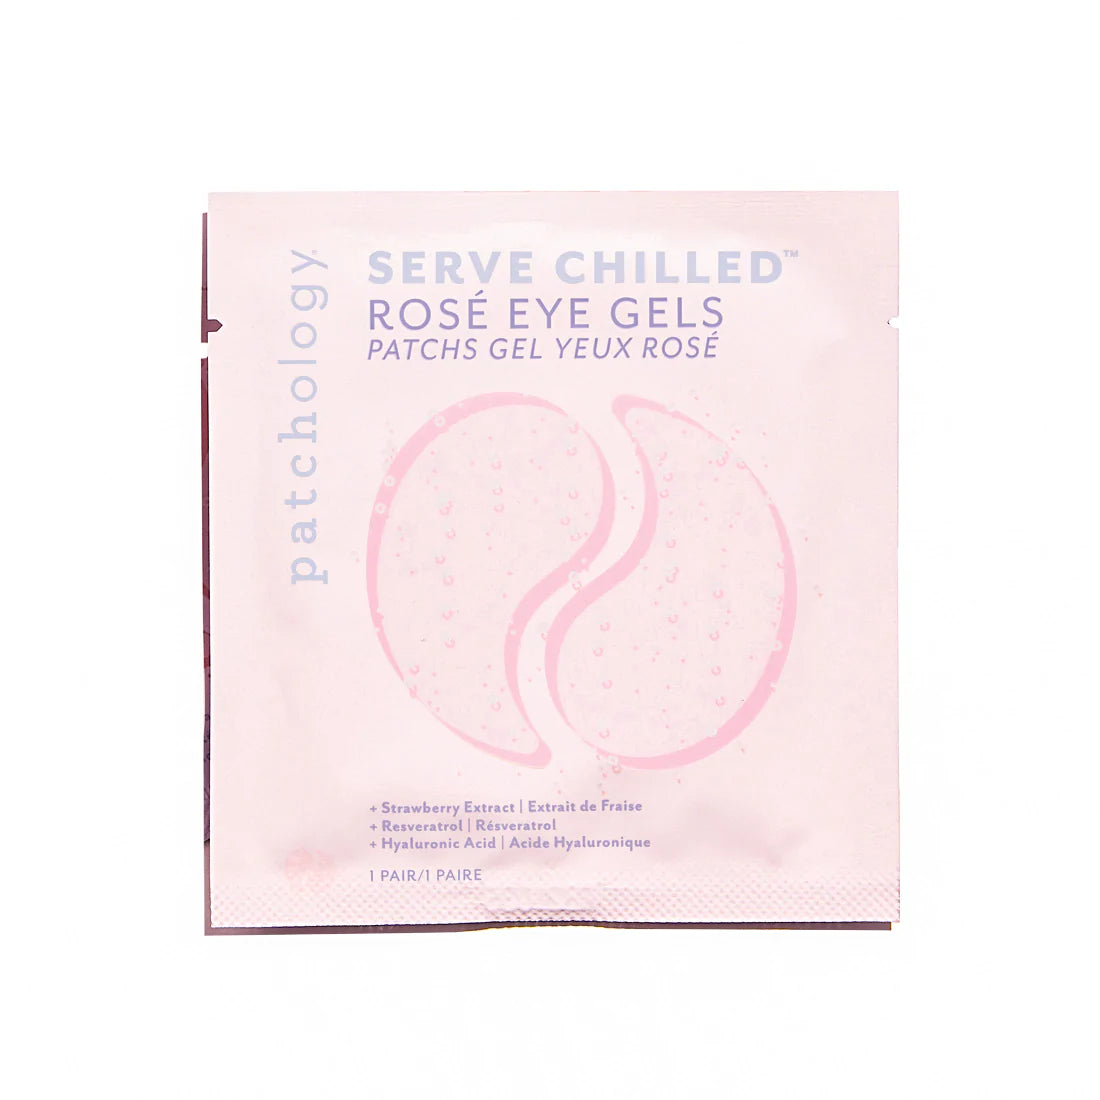  Cheers every day with these bubbly, perfectly pink Rosé eye gels. Formulated with antioxidants Resveratrol (from grapes!) and Strawberry Extract to help protect from environmental stressors—which can lead to early signs of aging—and Hyaluronic Acid for a megadose of hydration. Pro tip: keep ‘em chilling in the fridge for when your undereyes need their own sparkling pour of happé-ness.